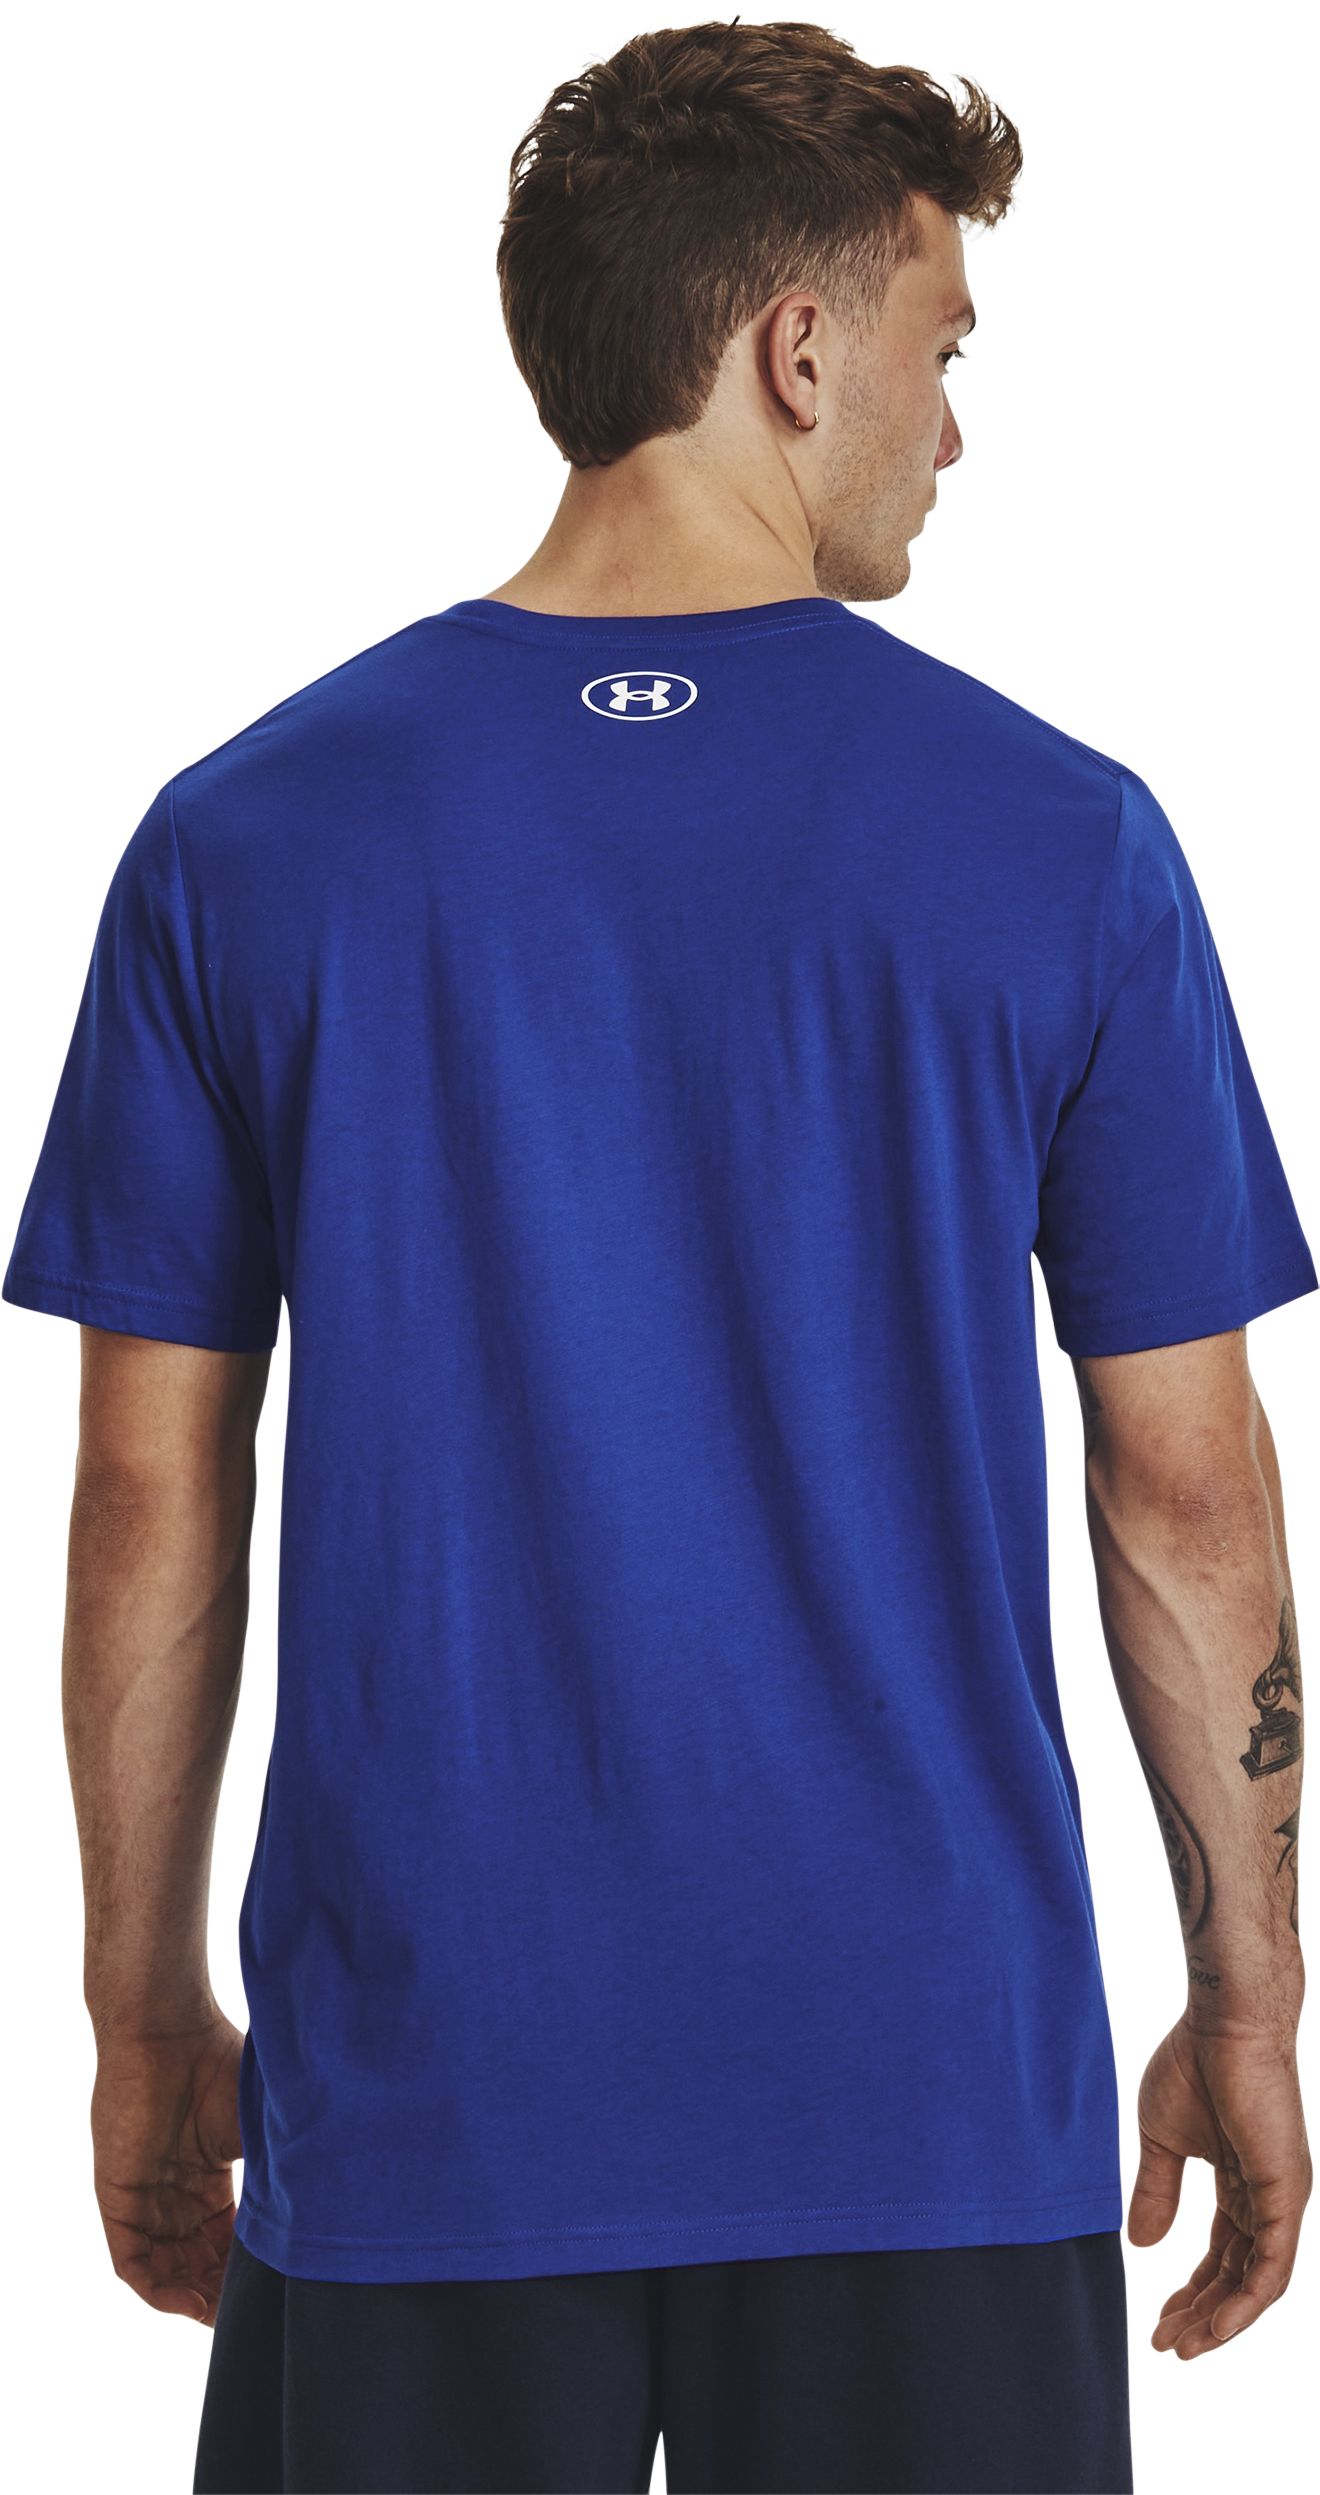 UNDER ARMOUR, M SPORTSTYLE LOGO SS TEE